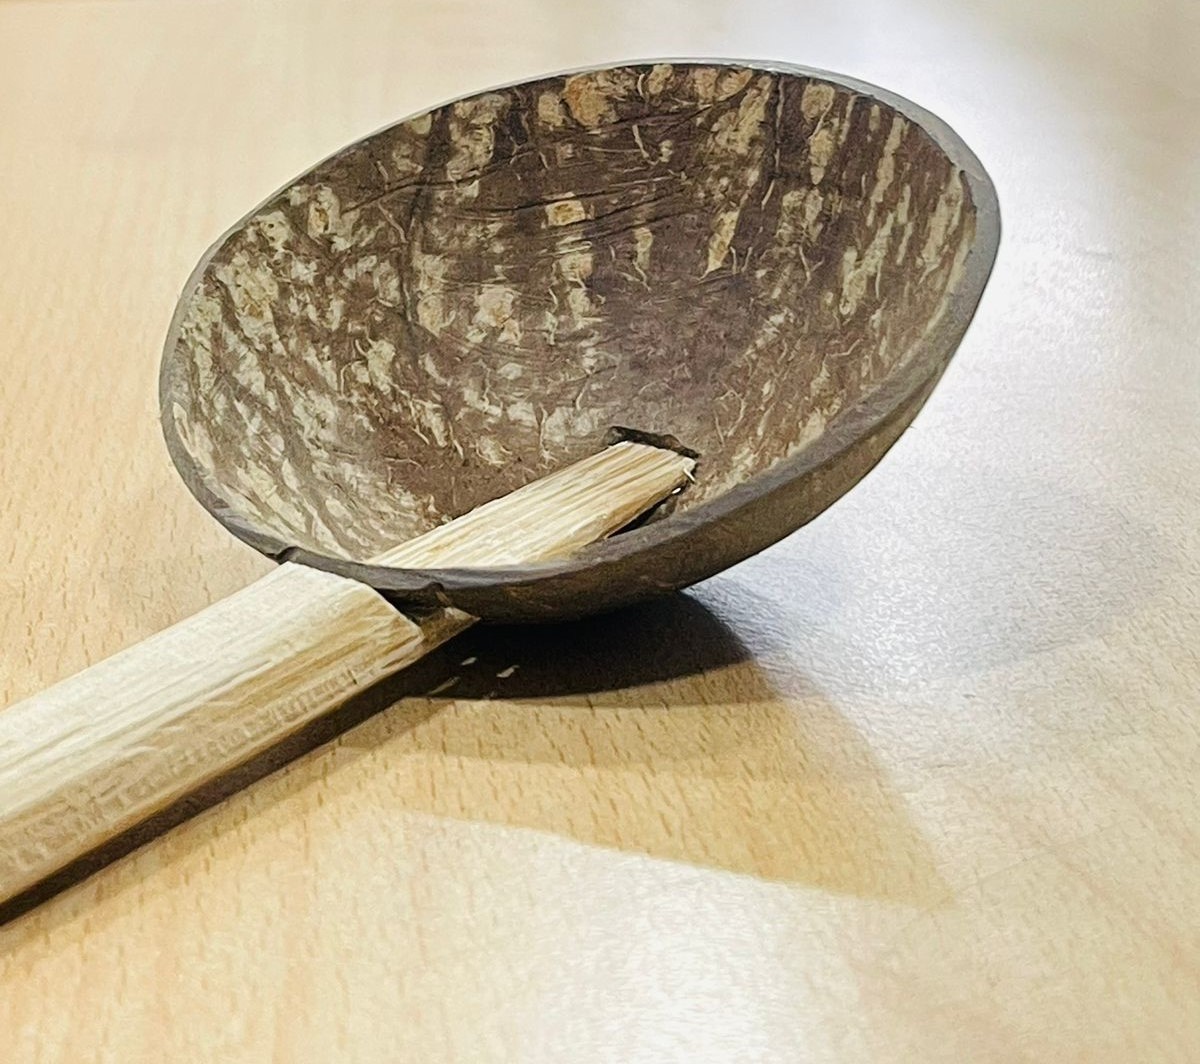 Traditional Kitchen Spoon Made of Coconut Shell